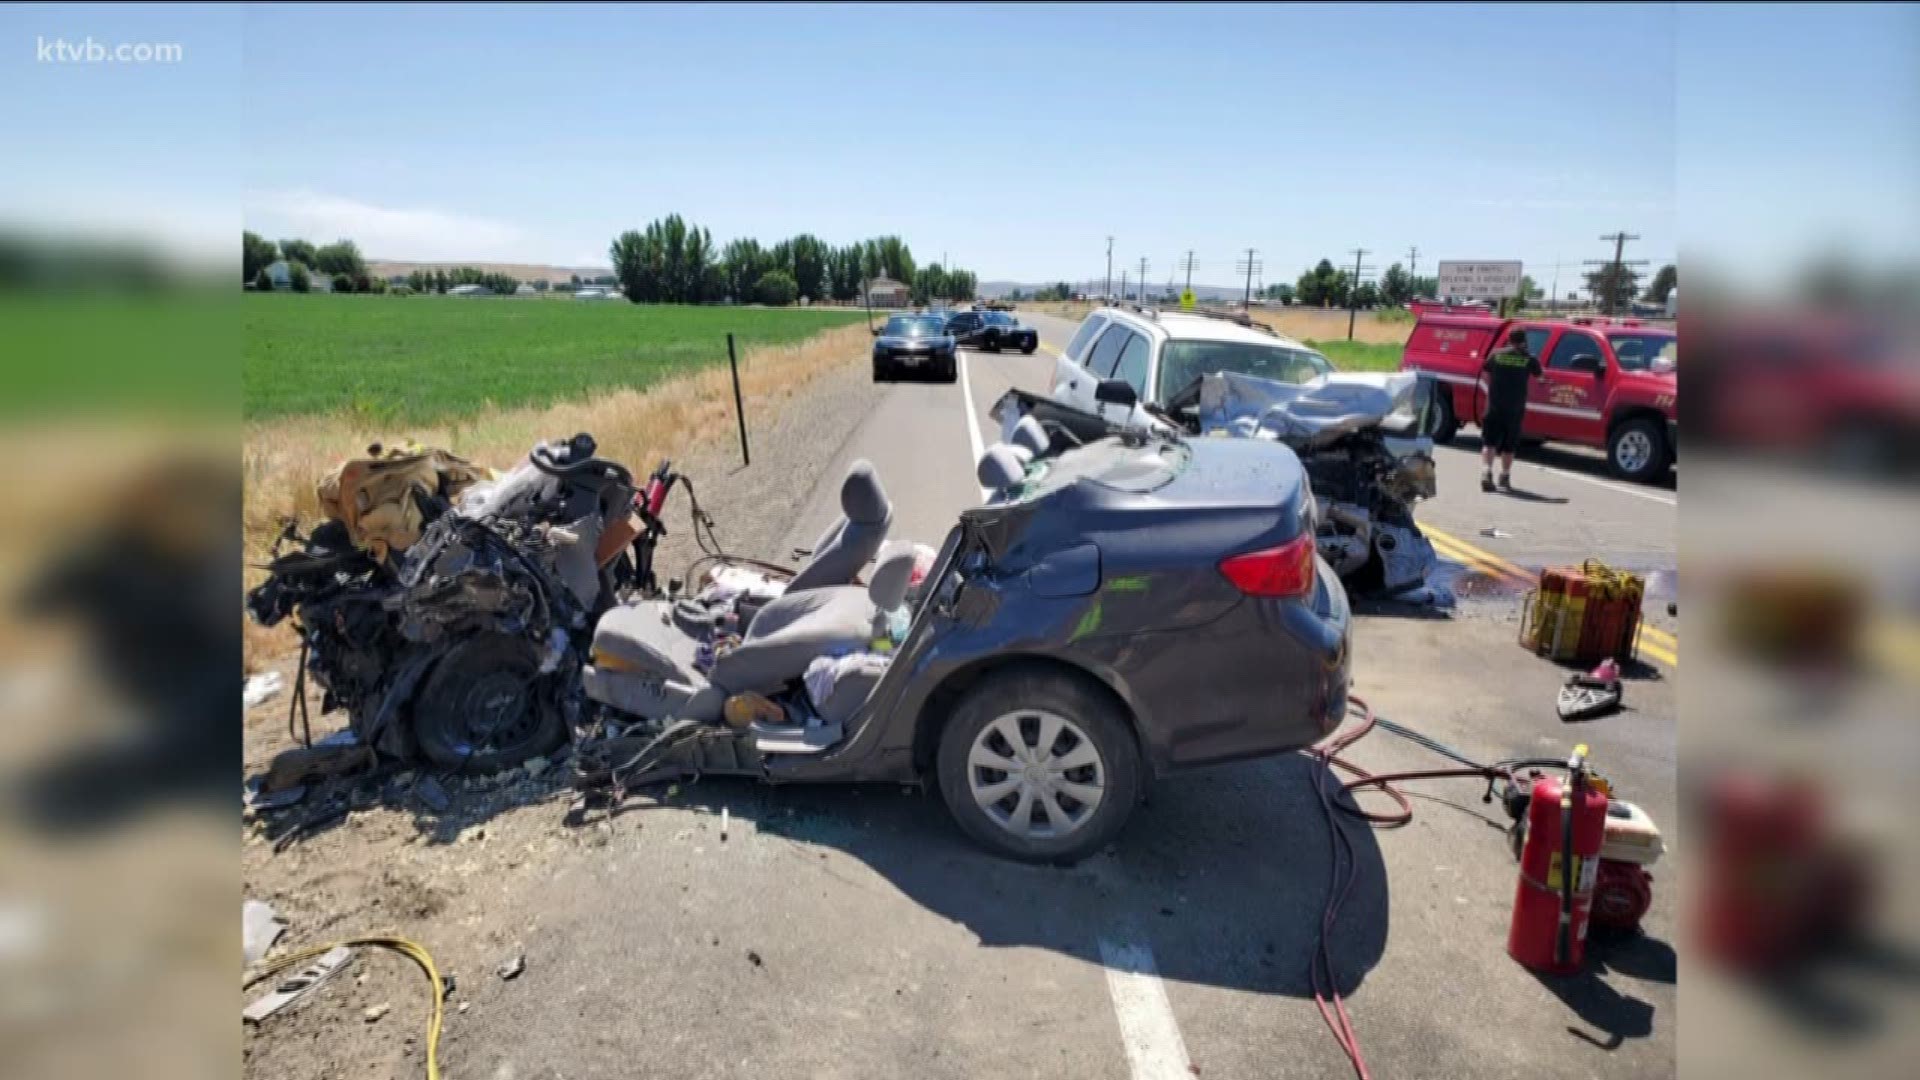 71-year-old Lois Bridge of Weiser died on Monday from blunt force trauma from a car crash, according to the coroner's release. Bridge died at Saint Alphonsus Regional Medical Center after being taken by air ambulance from the scene of the crash on Sunday.